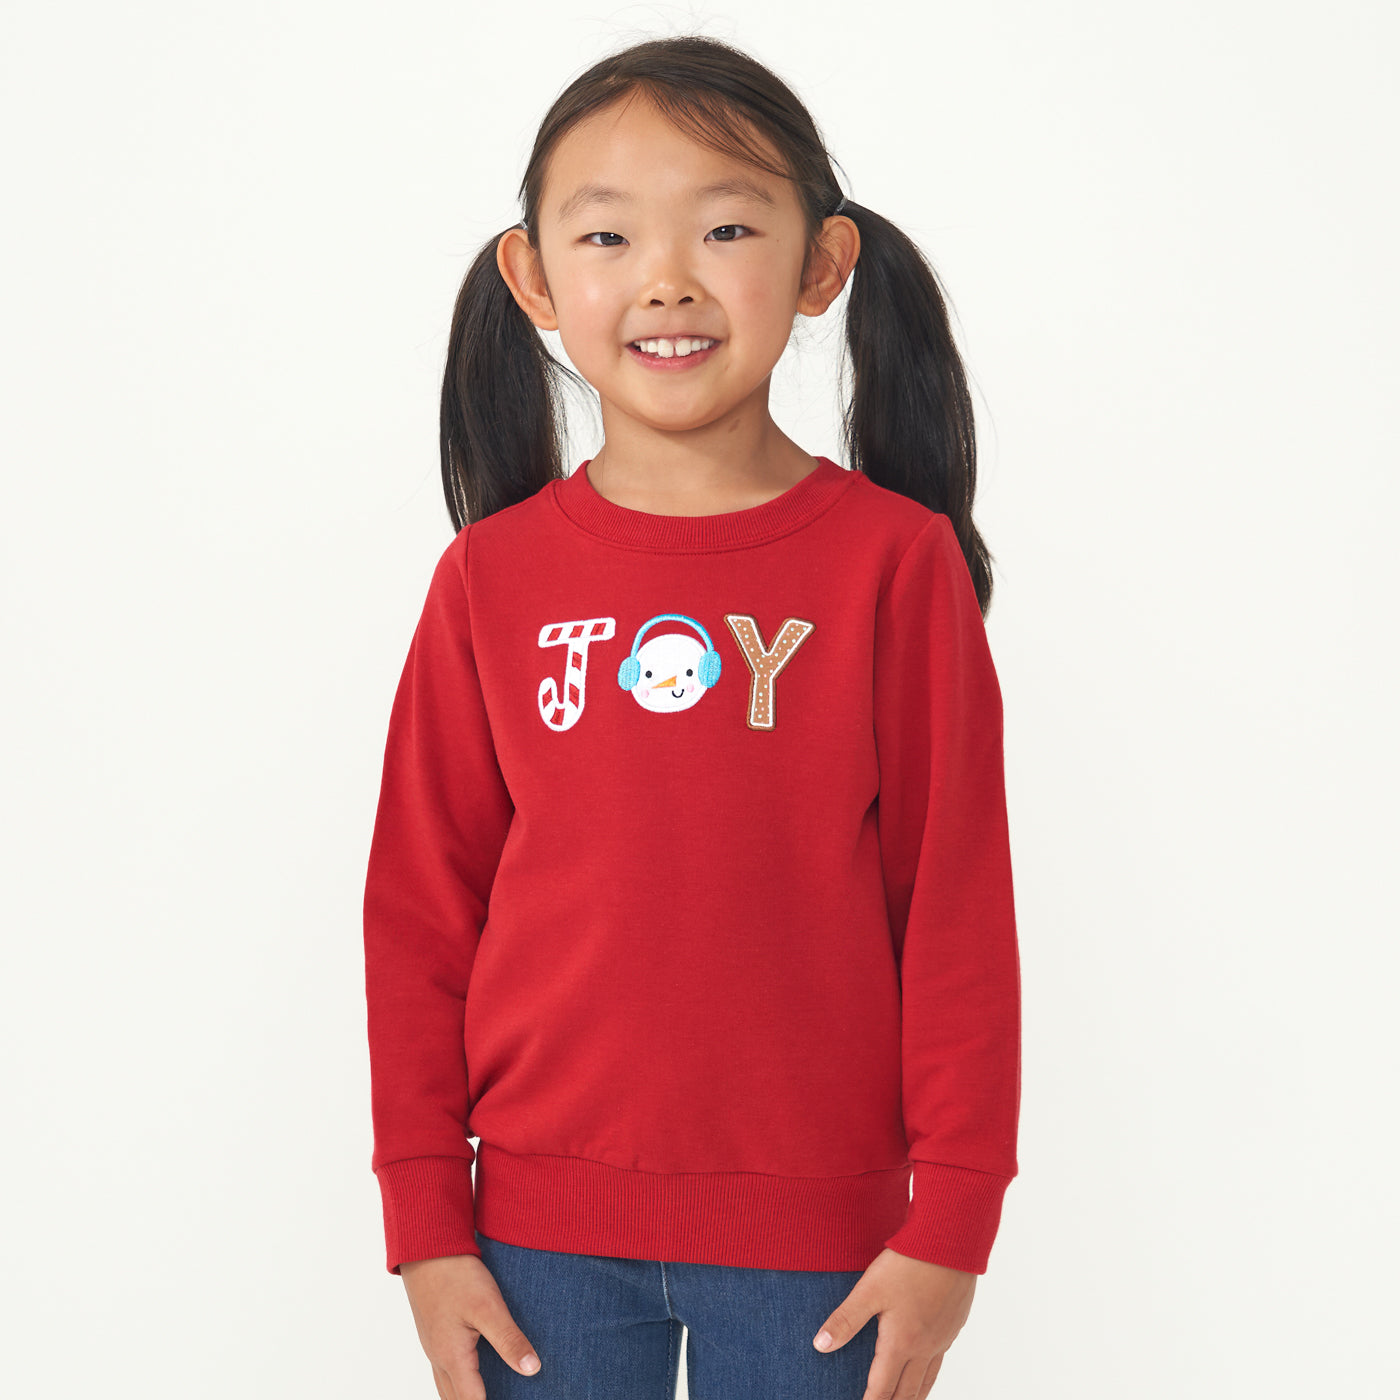 Alternate image of a child wearing a Holiday Red Joy crewneck